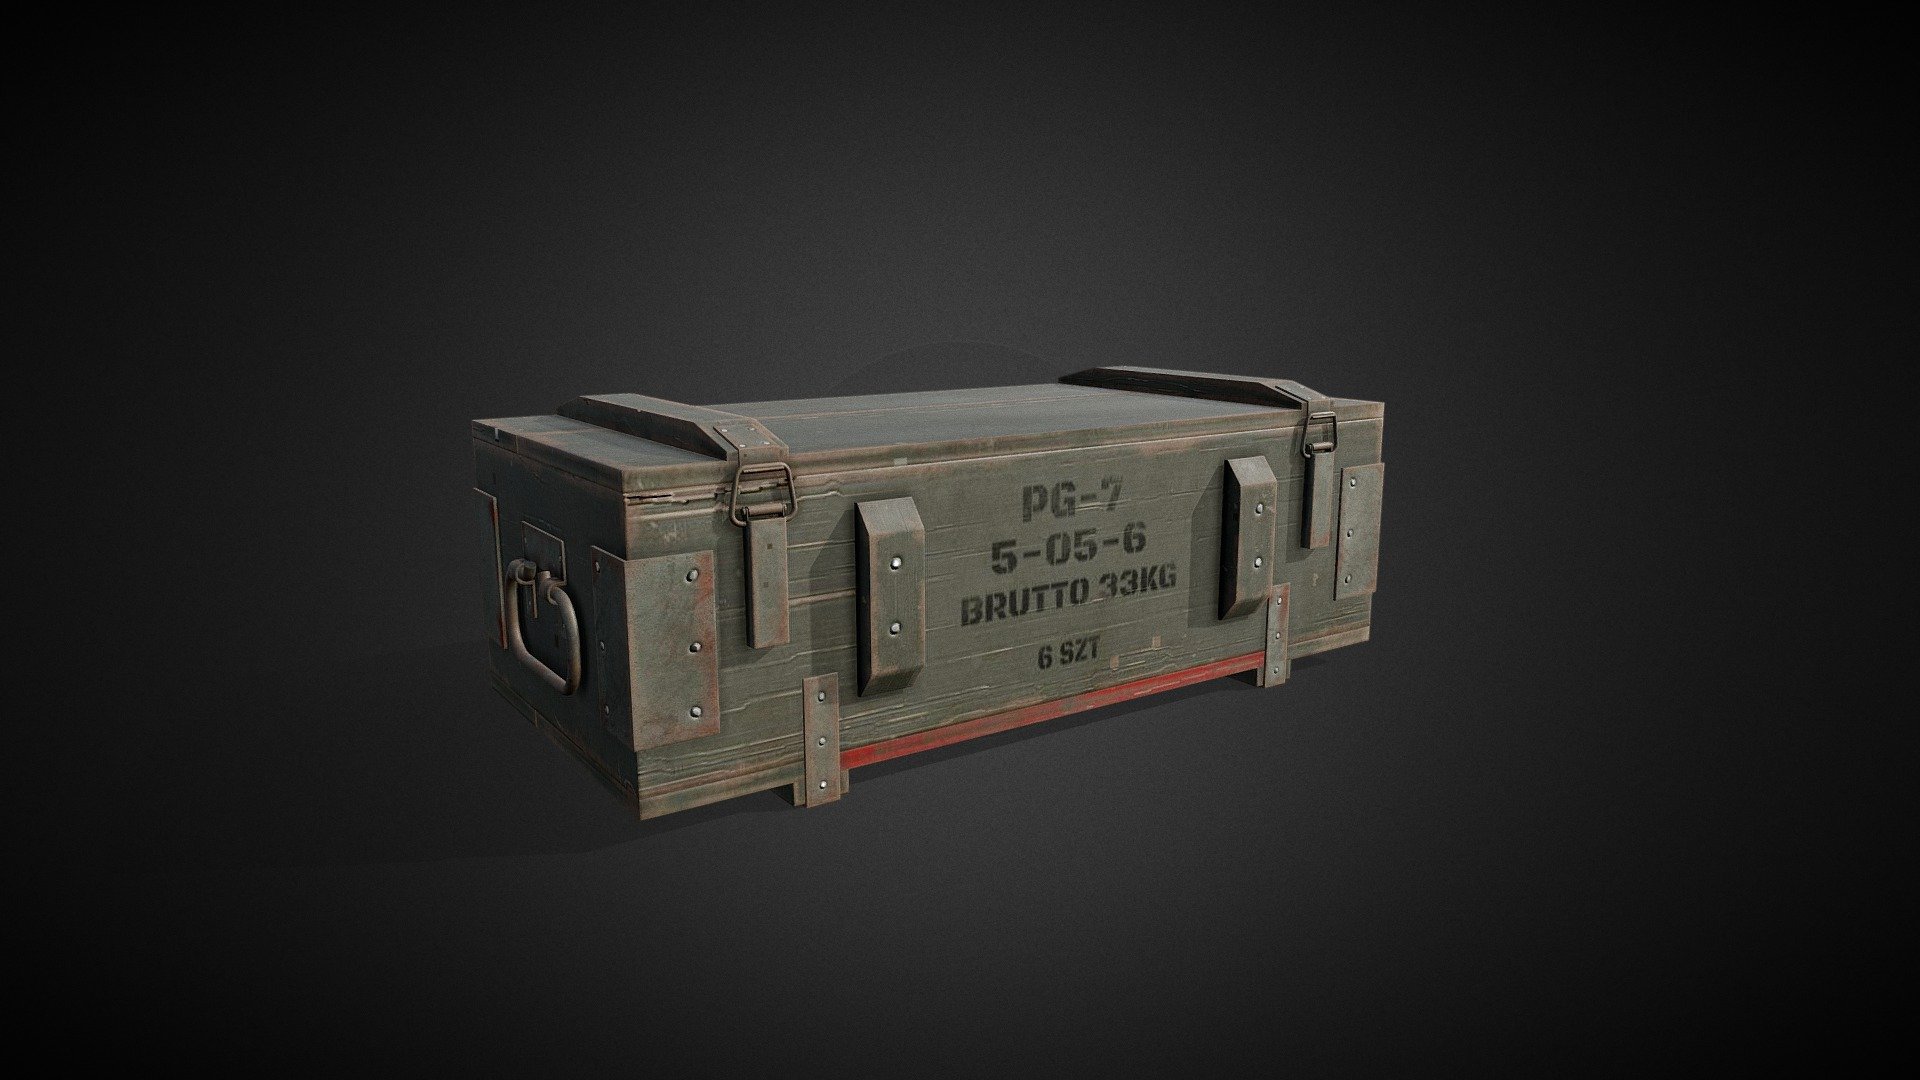 Tutorial here: https://www.youtube.com/channel/UC3R6lDf-Rlb9QW-D3CnhR7w

The model works perfectly in close-ups and high quality renders. It was originally modelled in 3ds Max 22, textured in Substance Painter and rendered with Marmoset Toolbag 3.

What is in the archive: MAX_22; OBJ; FBX ; Textures (2k resolution)

Features: Model resolutions are optimized for polygon efficiency. Model is fully textured with all materials applied. All textures and materials are included and mapped in every format. Autodesk 3ds Max models grouped for easy selection &amp; objects are logically named for ease of scene management. No cleaning up necessary, just drop model into your scene and start rendering. No special plugin needed to open scene.

Textures formats: PNG (2K) - Military Ammo Box - Tutorial Included - Buy Royalty Free 3D model by ninashaw 3d model